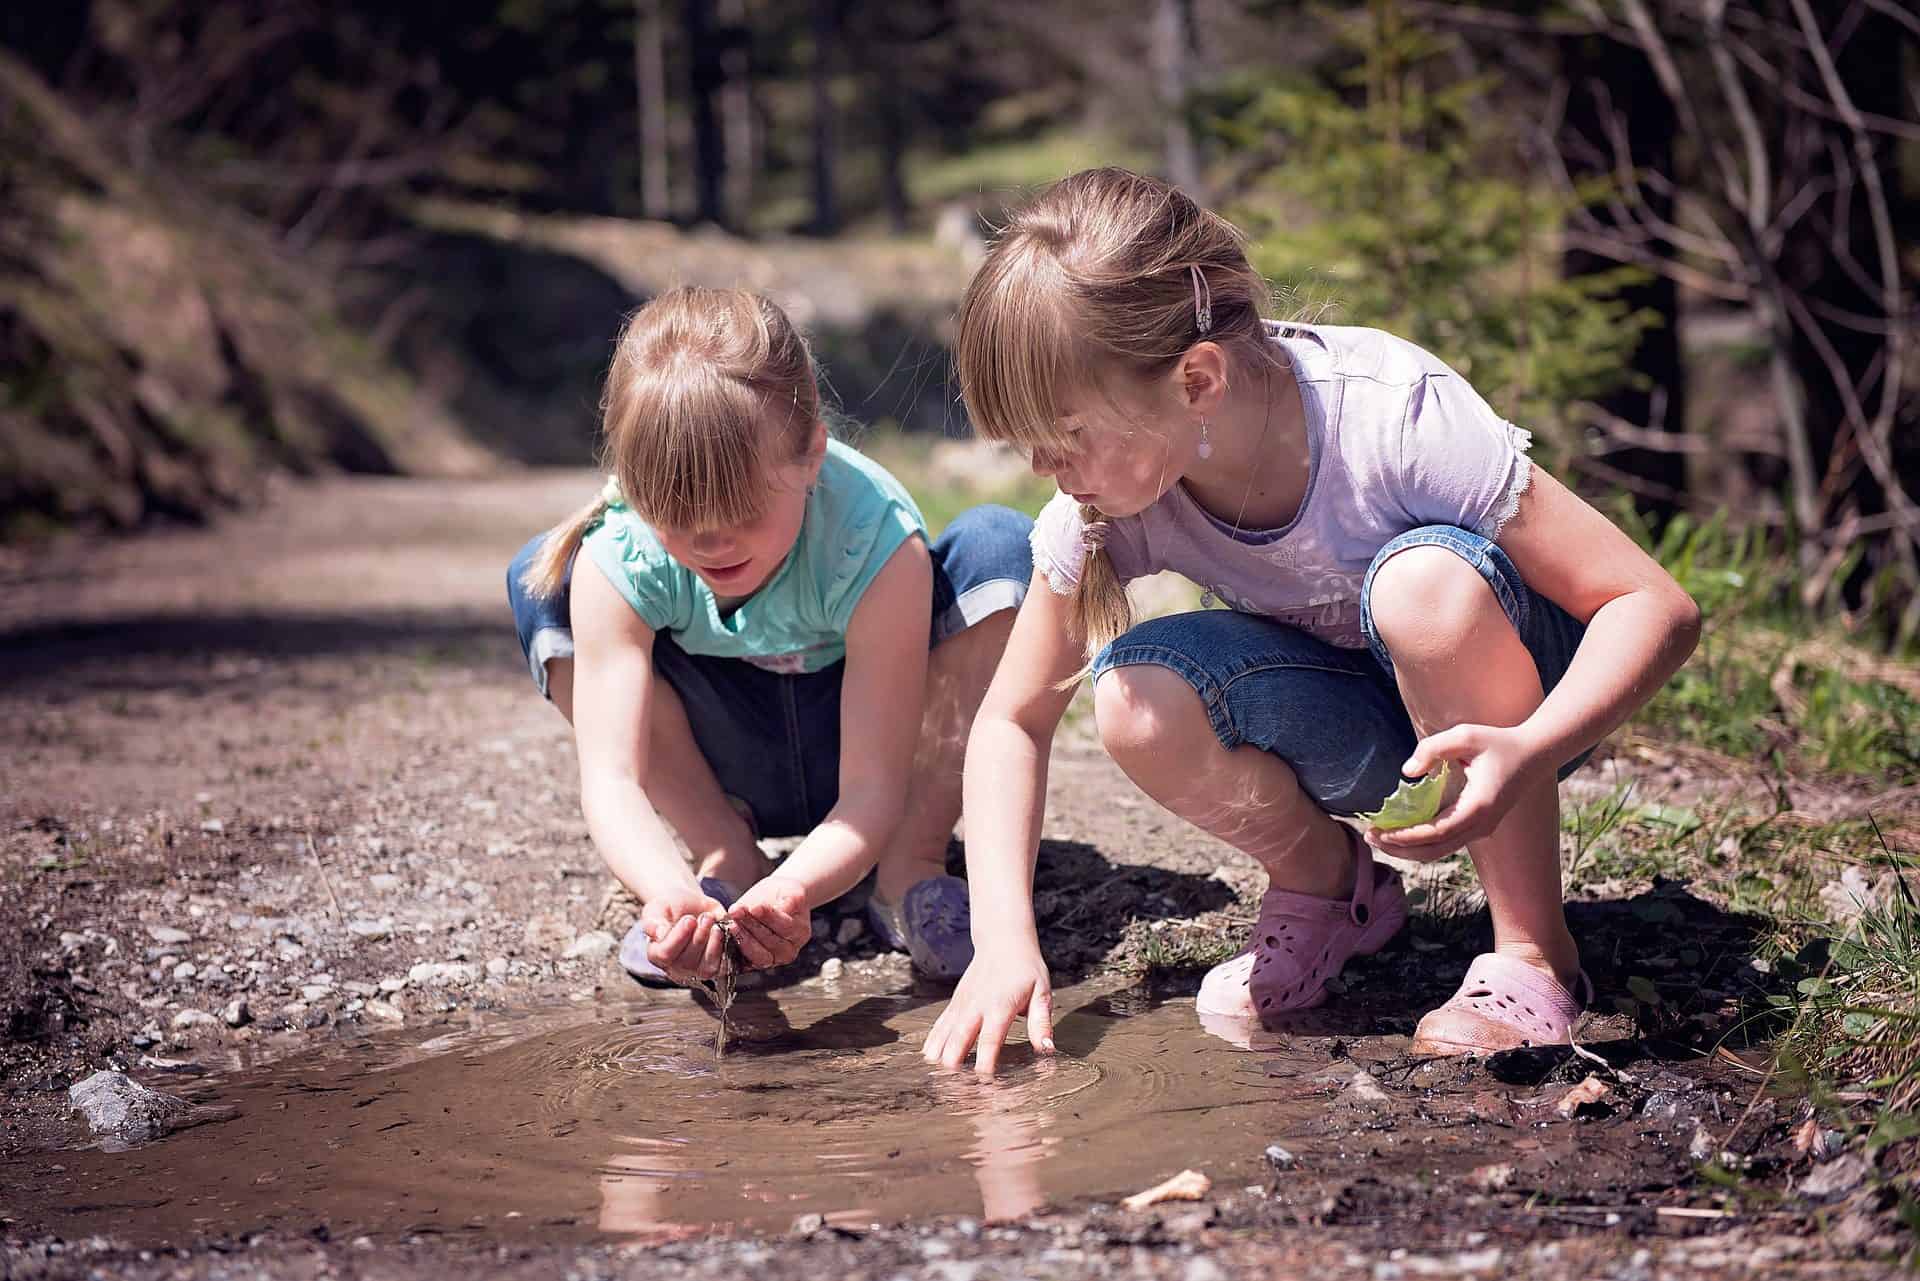 Two children playing in nature